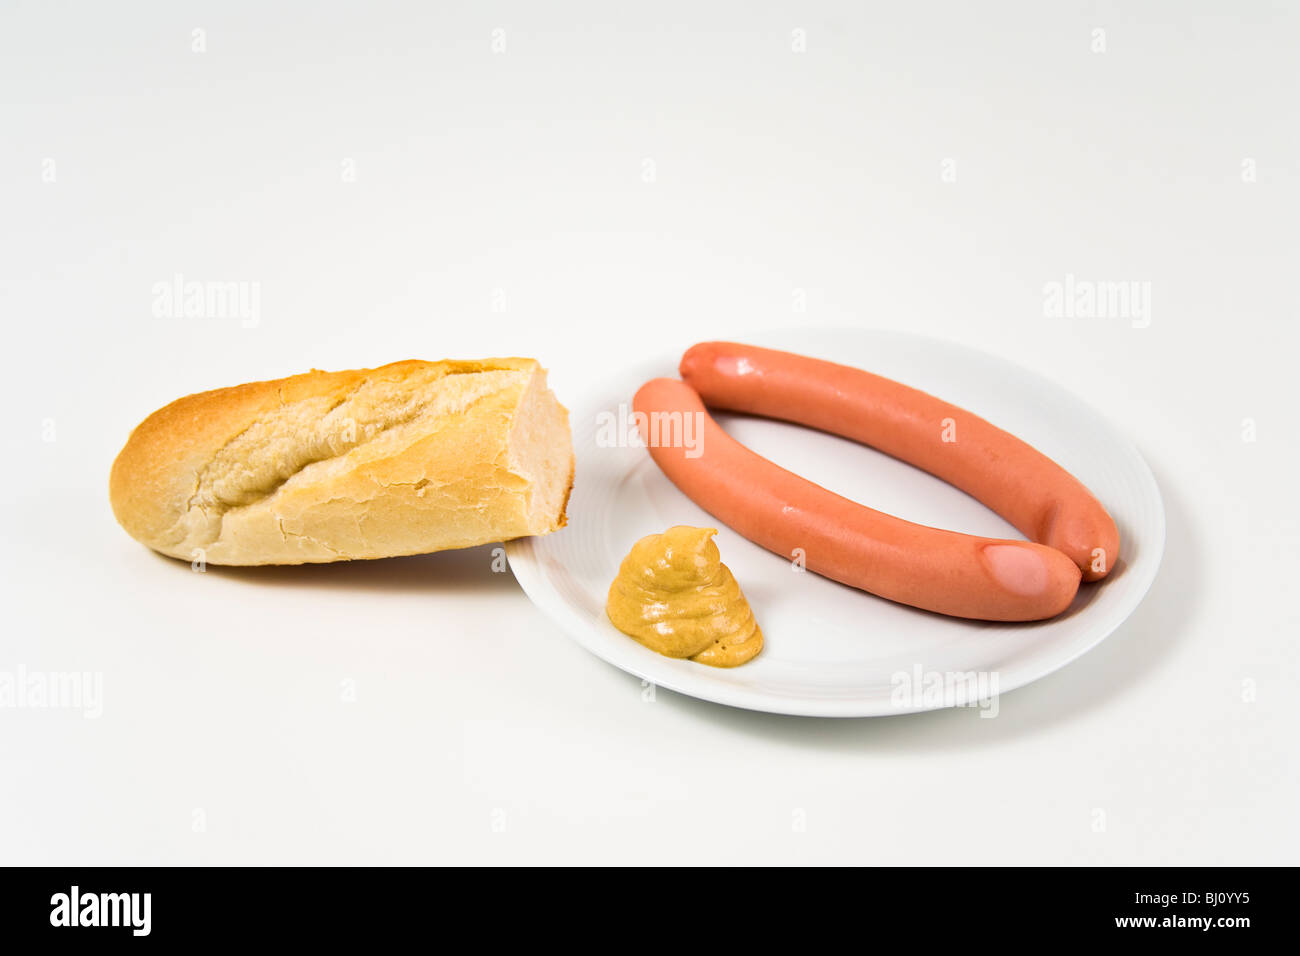 frankforter sausage with bread and mustard Stock Photo